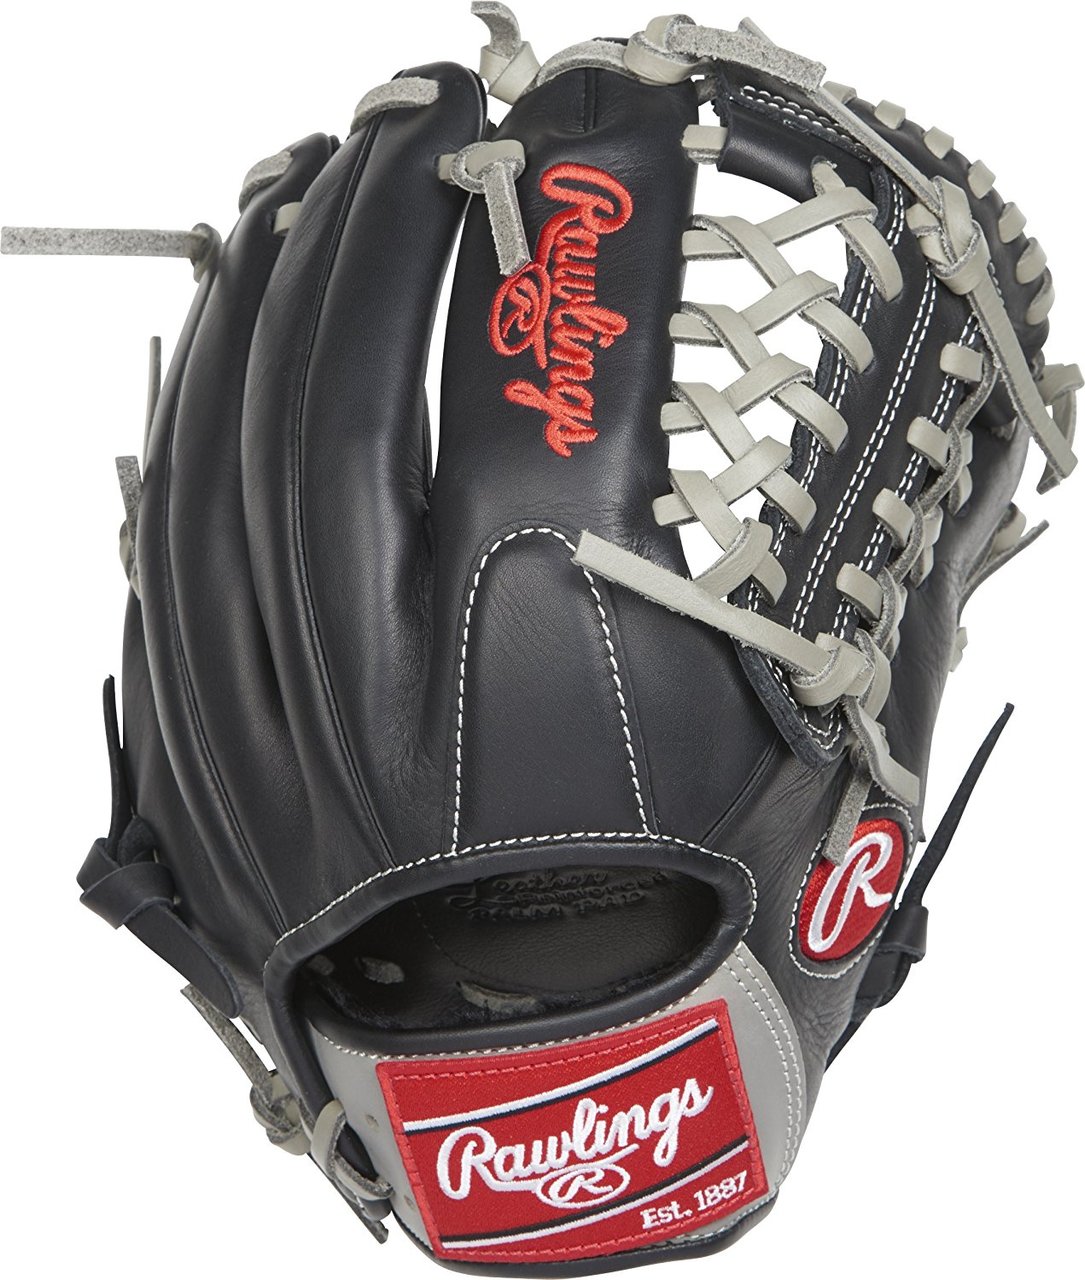 The top selling Gamer™ Series models are taking on a new updated pro-style look and feel with contrast lacing and improved shell leather providing shape retention and a performance level unmatched in price point. Featuring select pro-style patterns and Tennessee Tanning rawhide leather laces, these models are designed to be taken straight from the shelf to the field. Details Age: Adult Brand: Rawlings Map: No Sport: Baseball Type: Baseball Size: 11.5 in Back: Conventional Player Break-In: 20 Fit: Pro Level: Adult Lining: Pro Soft Leather Padding: Moldable Pattern: Baseball Position: Infield Series: Gamer Shell: Pro Soft Leather Type: Baseball